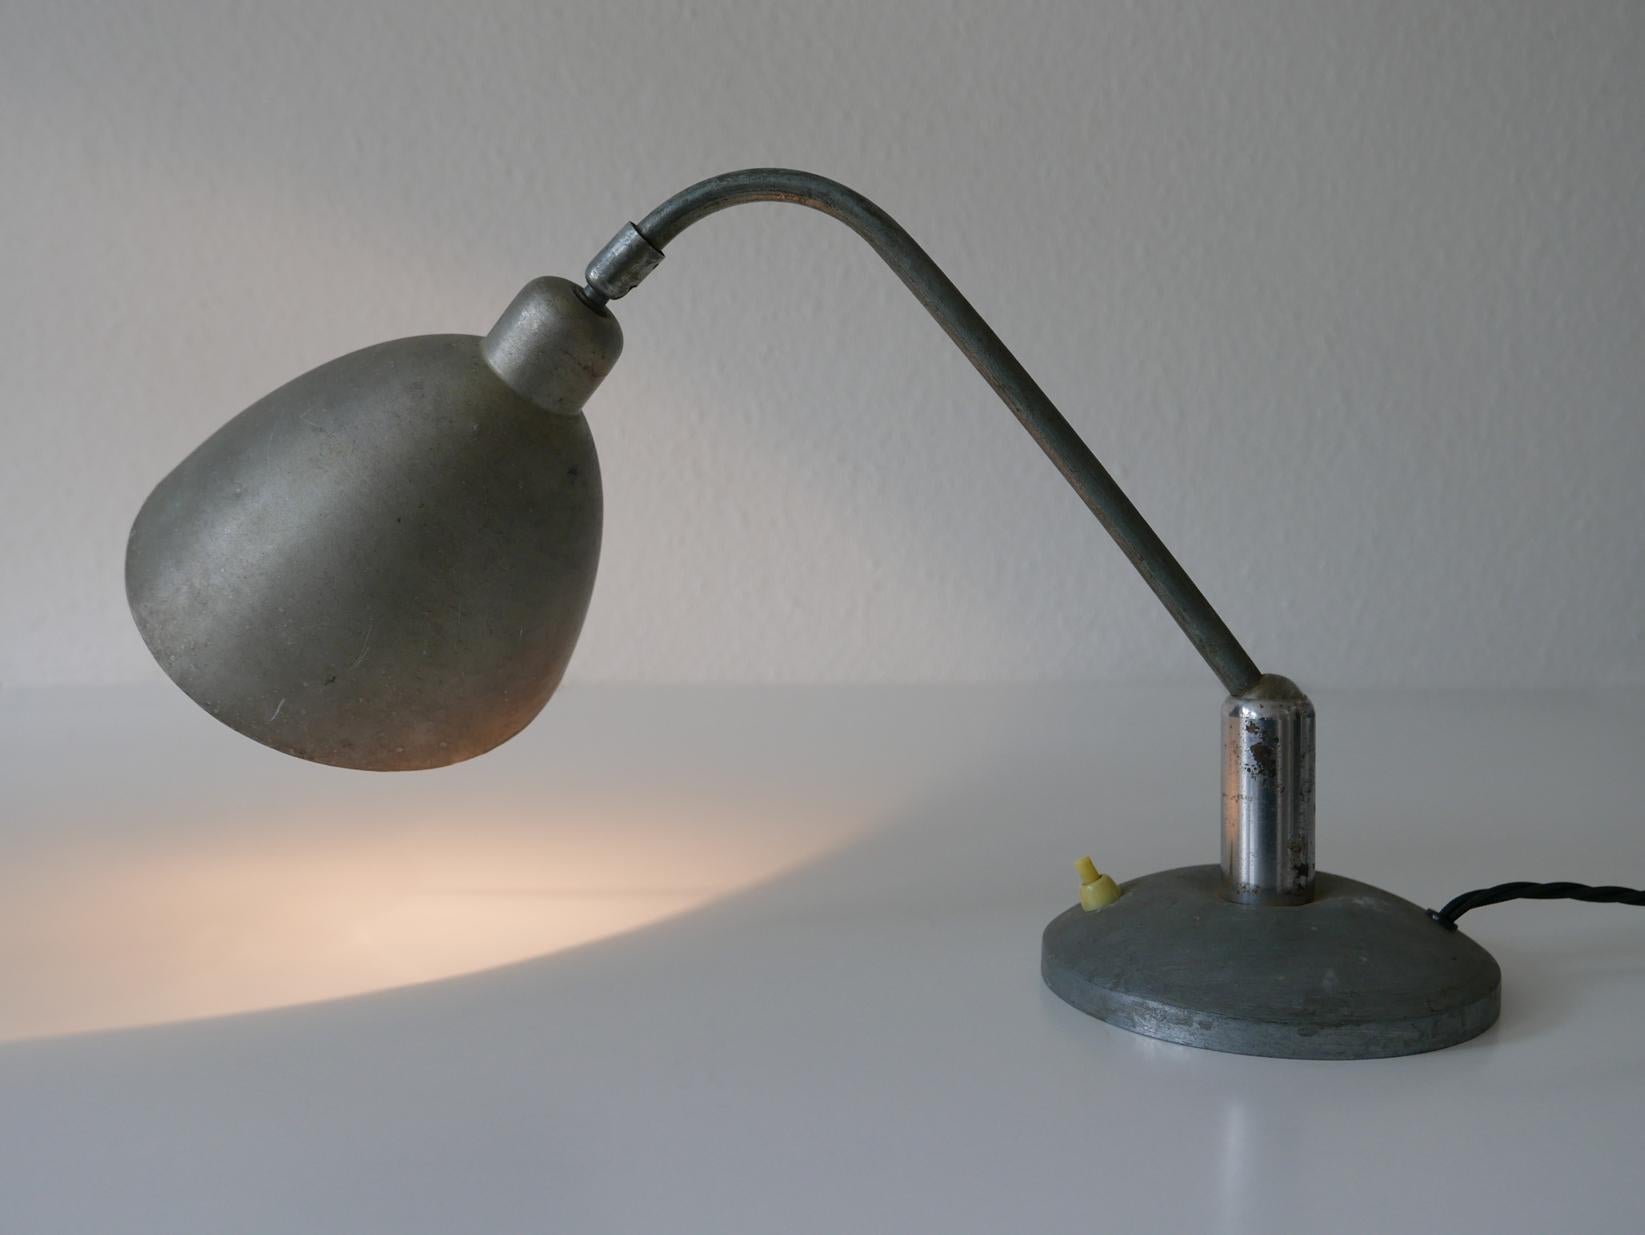 Early 20th Century Rare Czech Functionalist or Bauhaus Table Lamp by Franta ‘Frantisek’ Anyz, 1920s For Sale